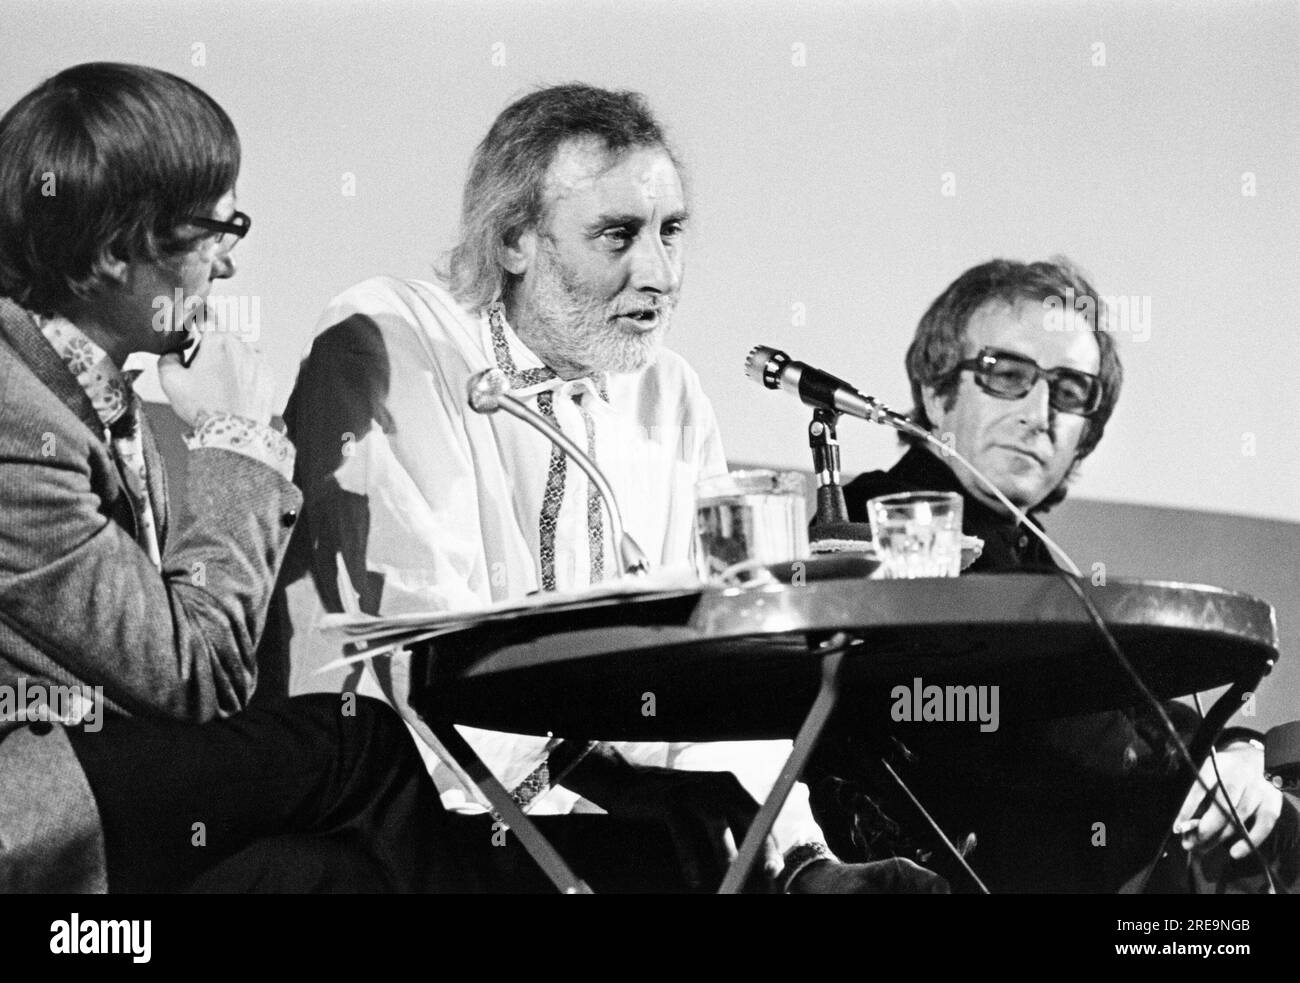 l-r: television interviewer & film expert Tony Bilbow with comedians Spike Milligan & Peter Sellers in a panel discussion at CINEMA CITY - An Exhibition of 75 Years of Moving Pictures at the Round House, London NW1 in October 1970 Stock Photo